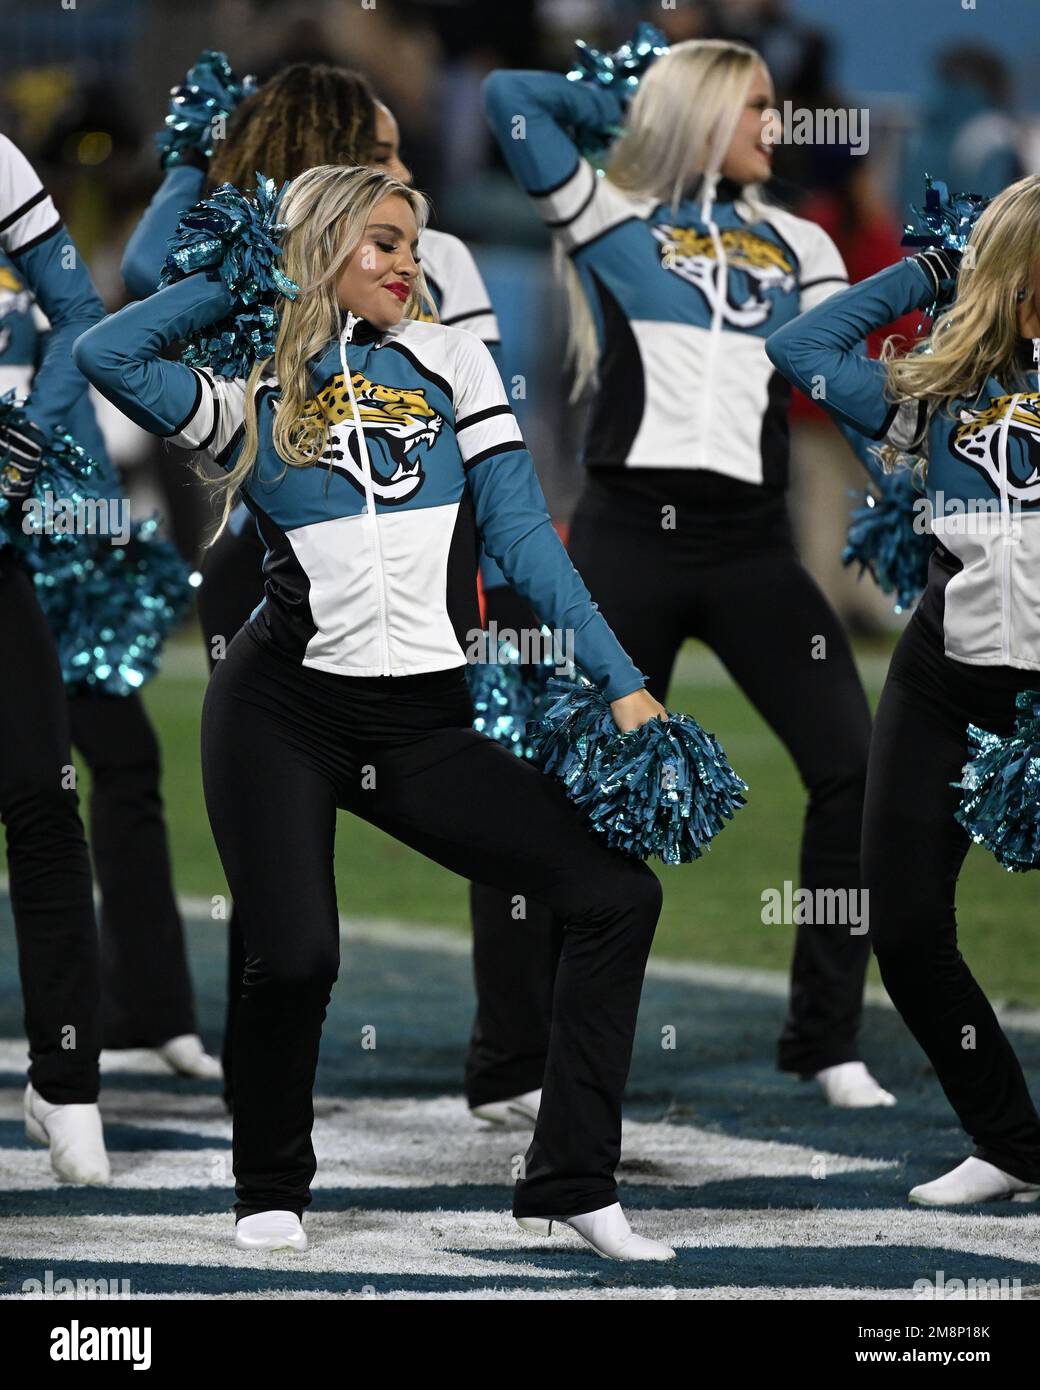 Jacksonville, USA. 14th Jan, 2023. Jacksnville Jaguars Cheerleaders perform in the second half as the Chargers compete against the Jaguars in the NFL Wildcard Playoff game at the TIAA Bank Field in Jacksonville, Florida on Saturday, January 14, 2023. The Jaguars defeated the Chargers on a come from behind victory by a score of 31-30. Photo by Joe Marino/UPI. Credit: UPI/Alamy Live News Stock Photo